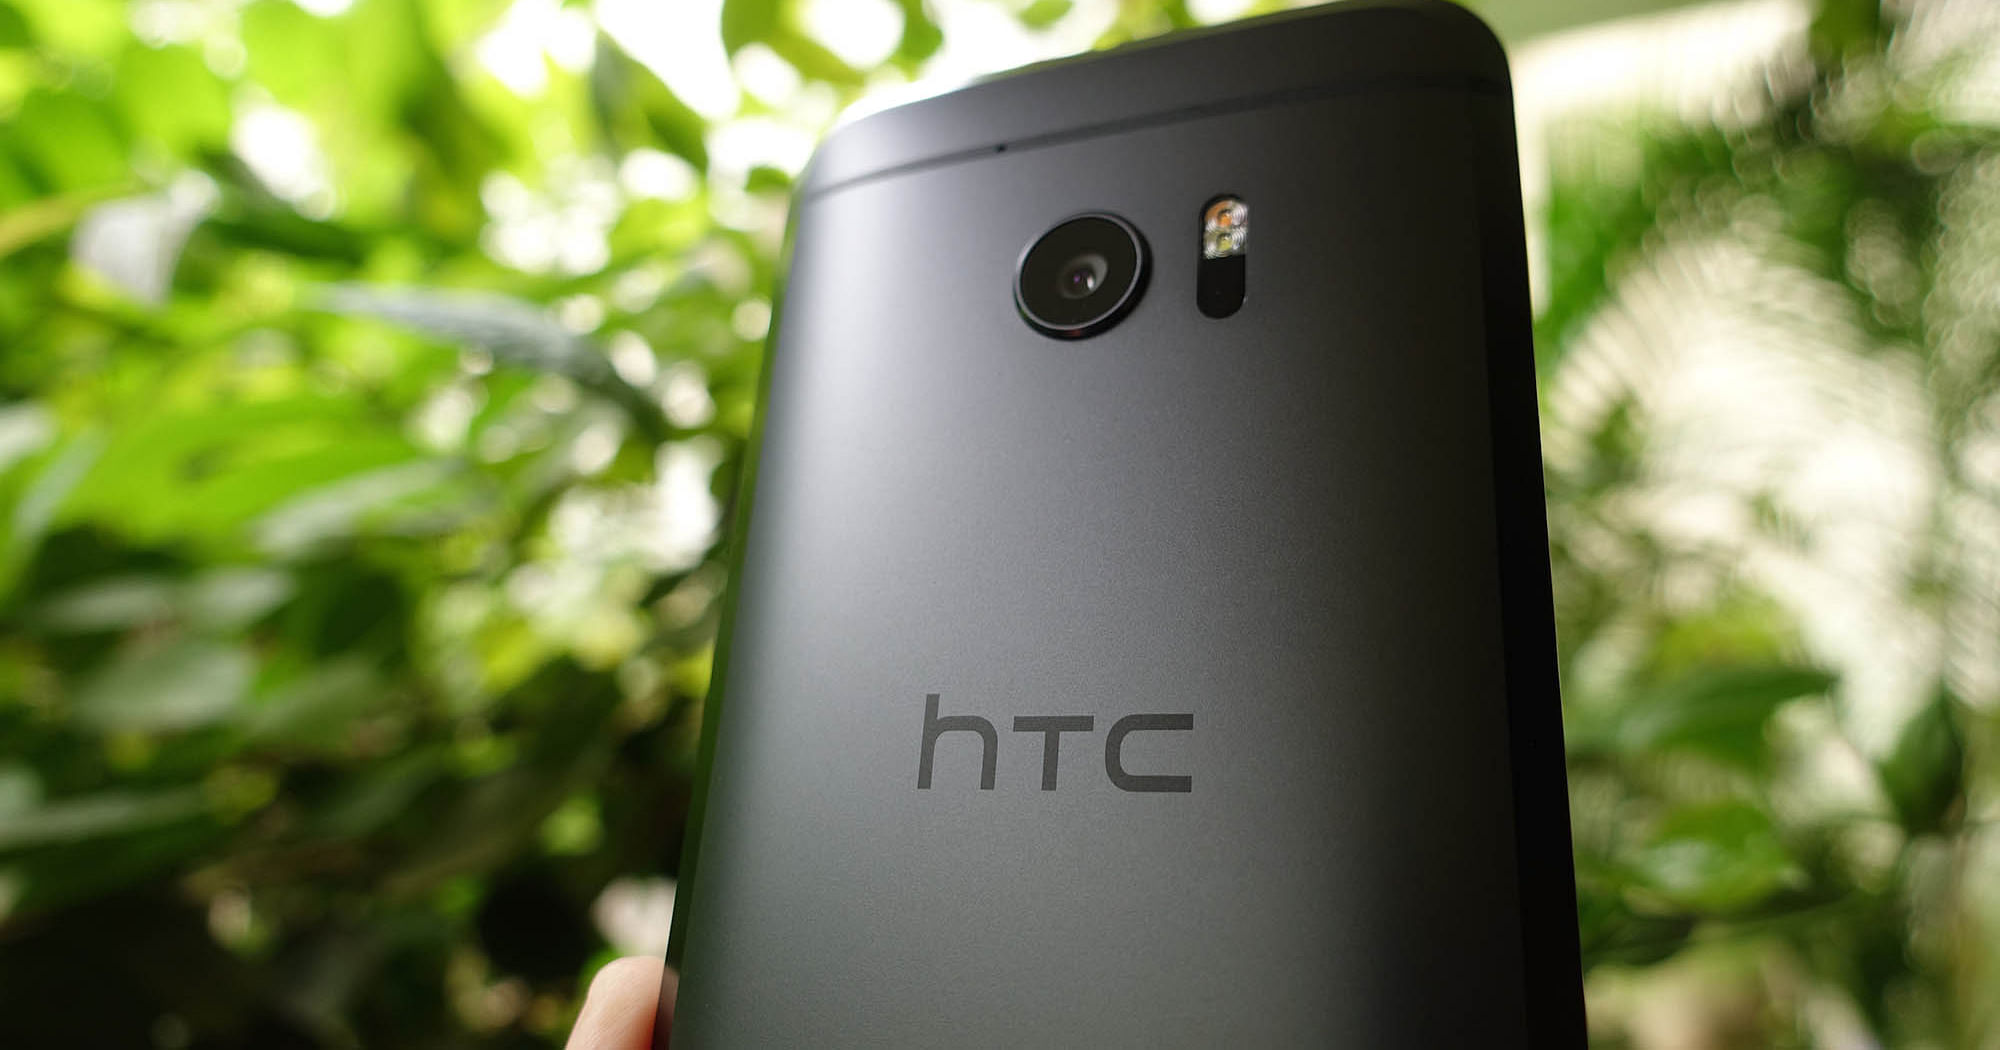 HTC to exit from India as it failed to grasp Chinese competition: Experts